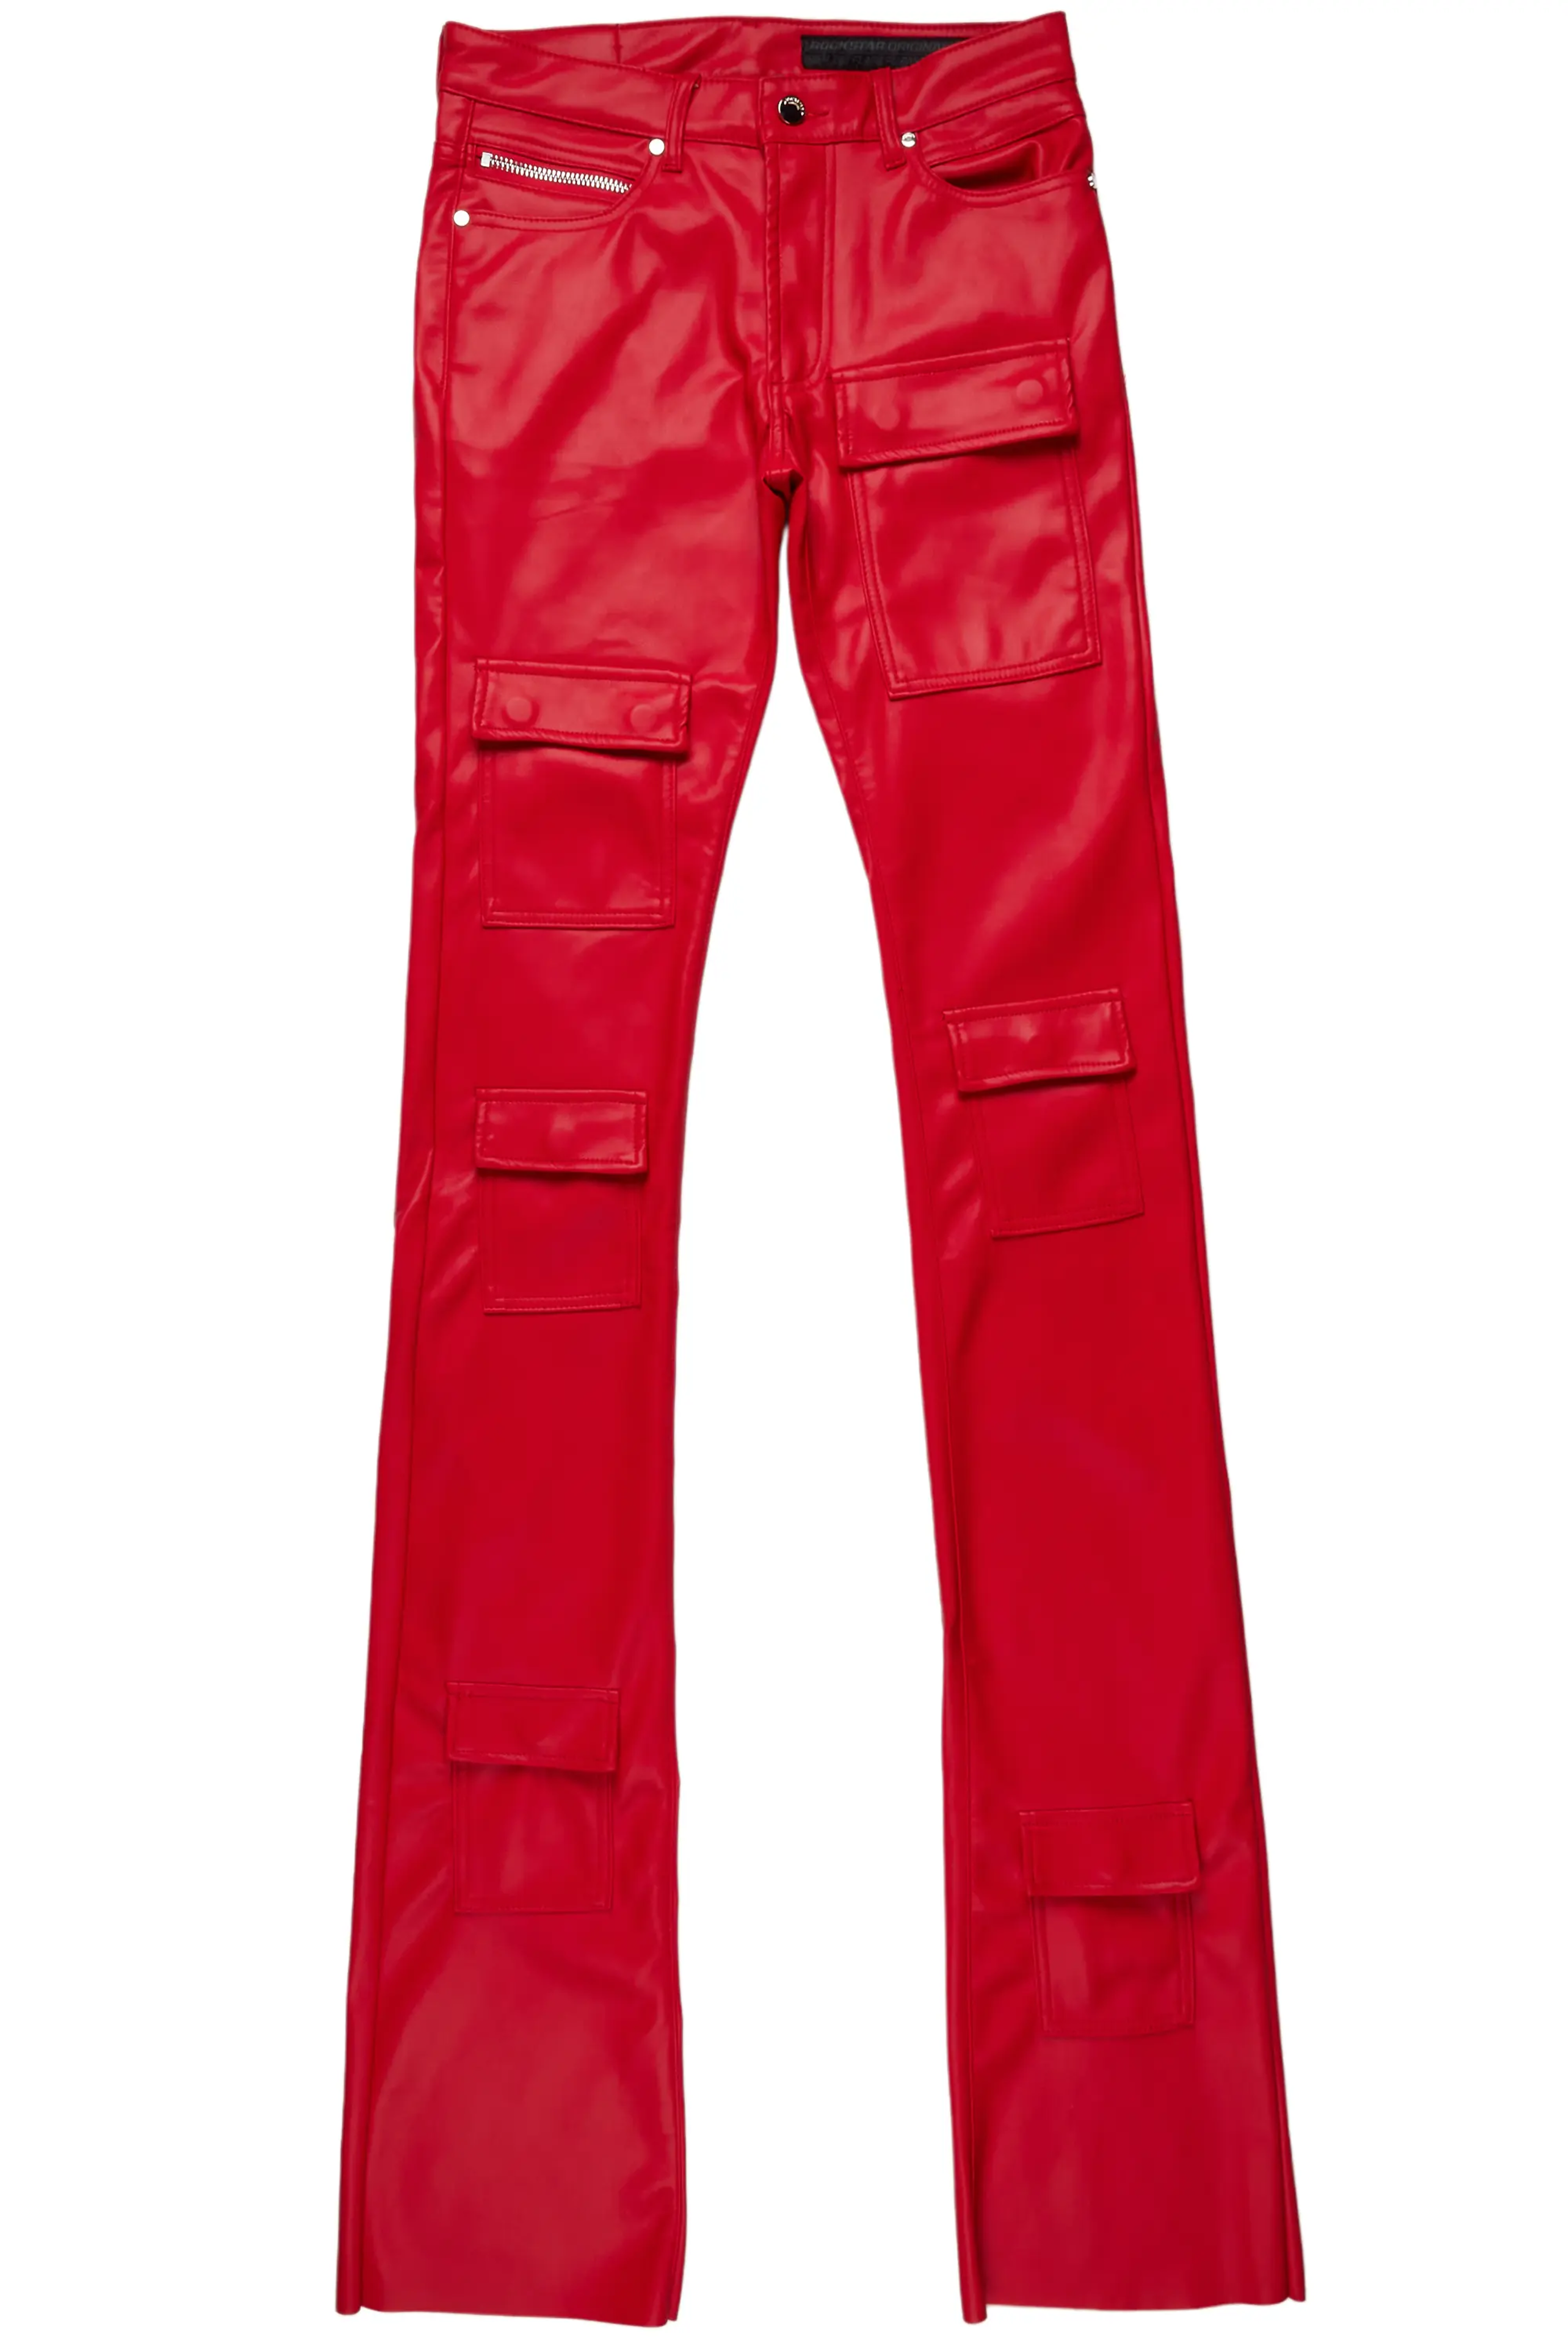 Alternate View 5 of Petrus Red Faux Leather Super Stacked Flare Jean